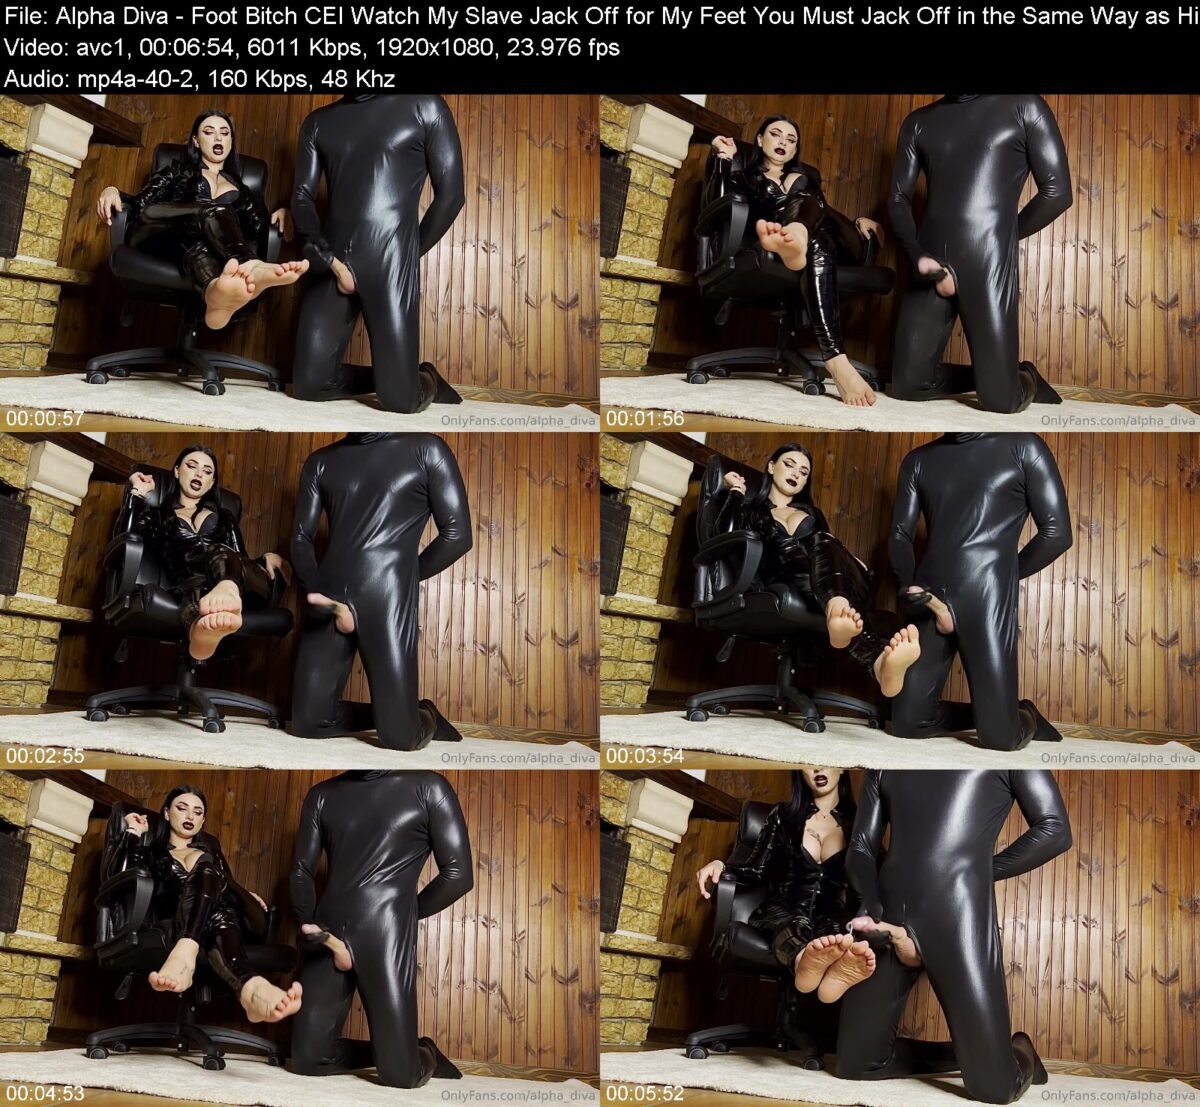 Alpha Diva - Foot Bitch CEI Watch My Slave Jack Off for My Feet You Must Jack Off in the Same Way as Him and Wai